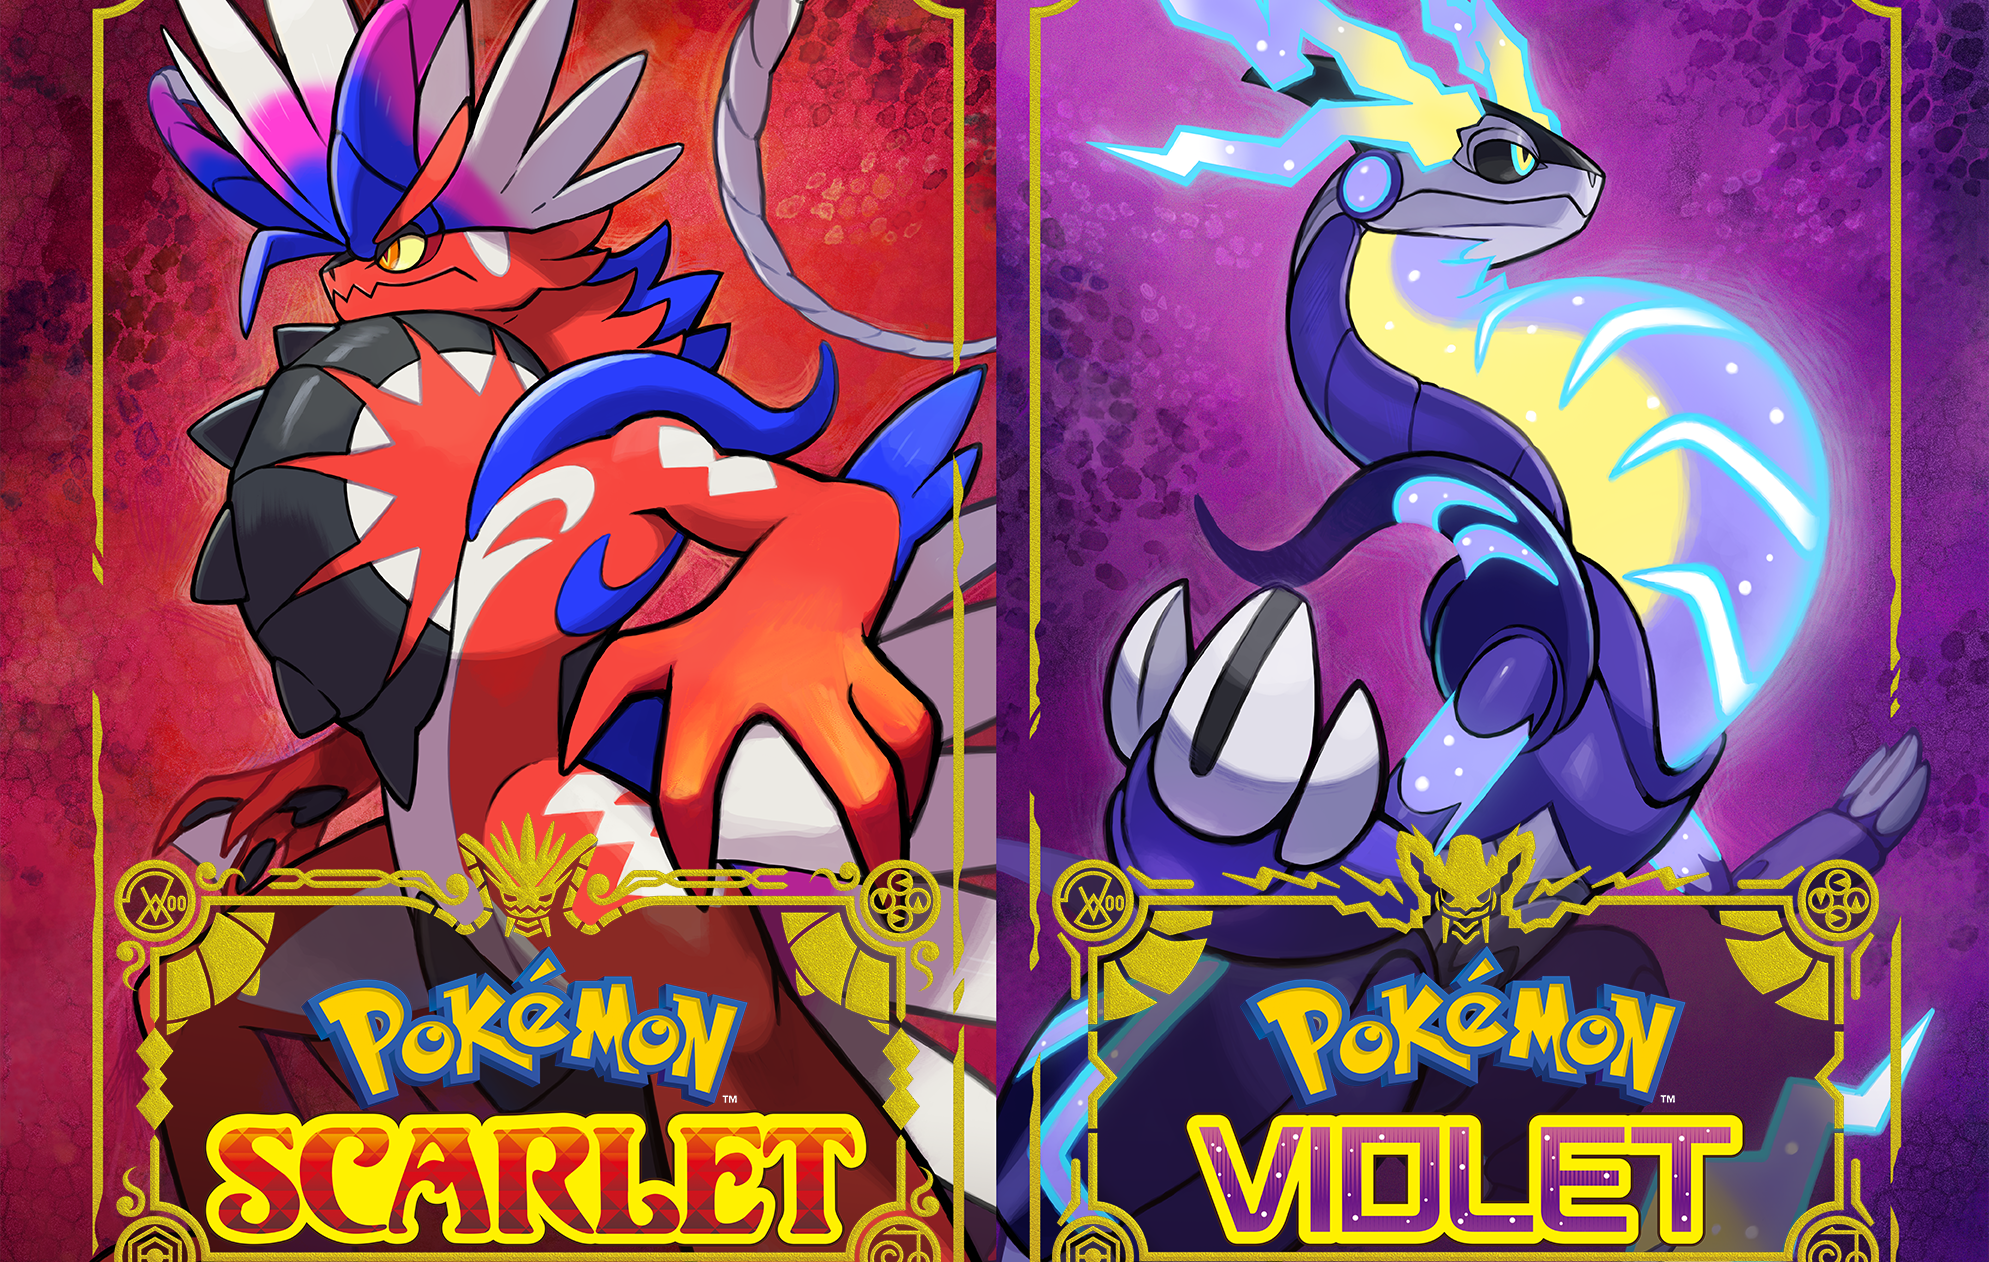 Game covers for 'Pokémon Scarlet' and 'Violet,' which take place in the Paldea region and have a unique plot. They feature the Legendary Pokémon for each game, with Scarlet boasting a red background and Legendary and Violet having a blue Legendary and purple background. Both look like dragons.